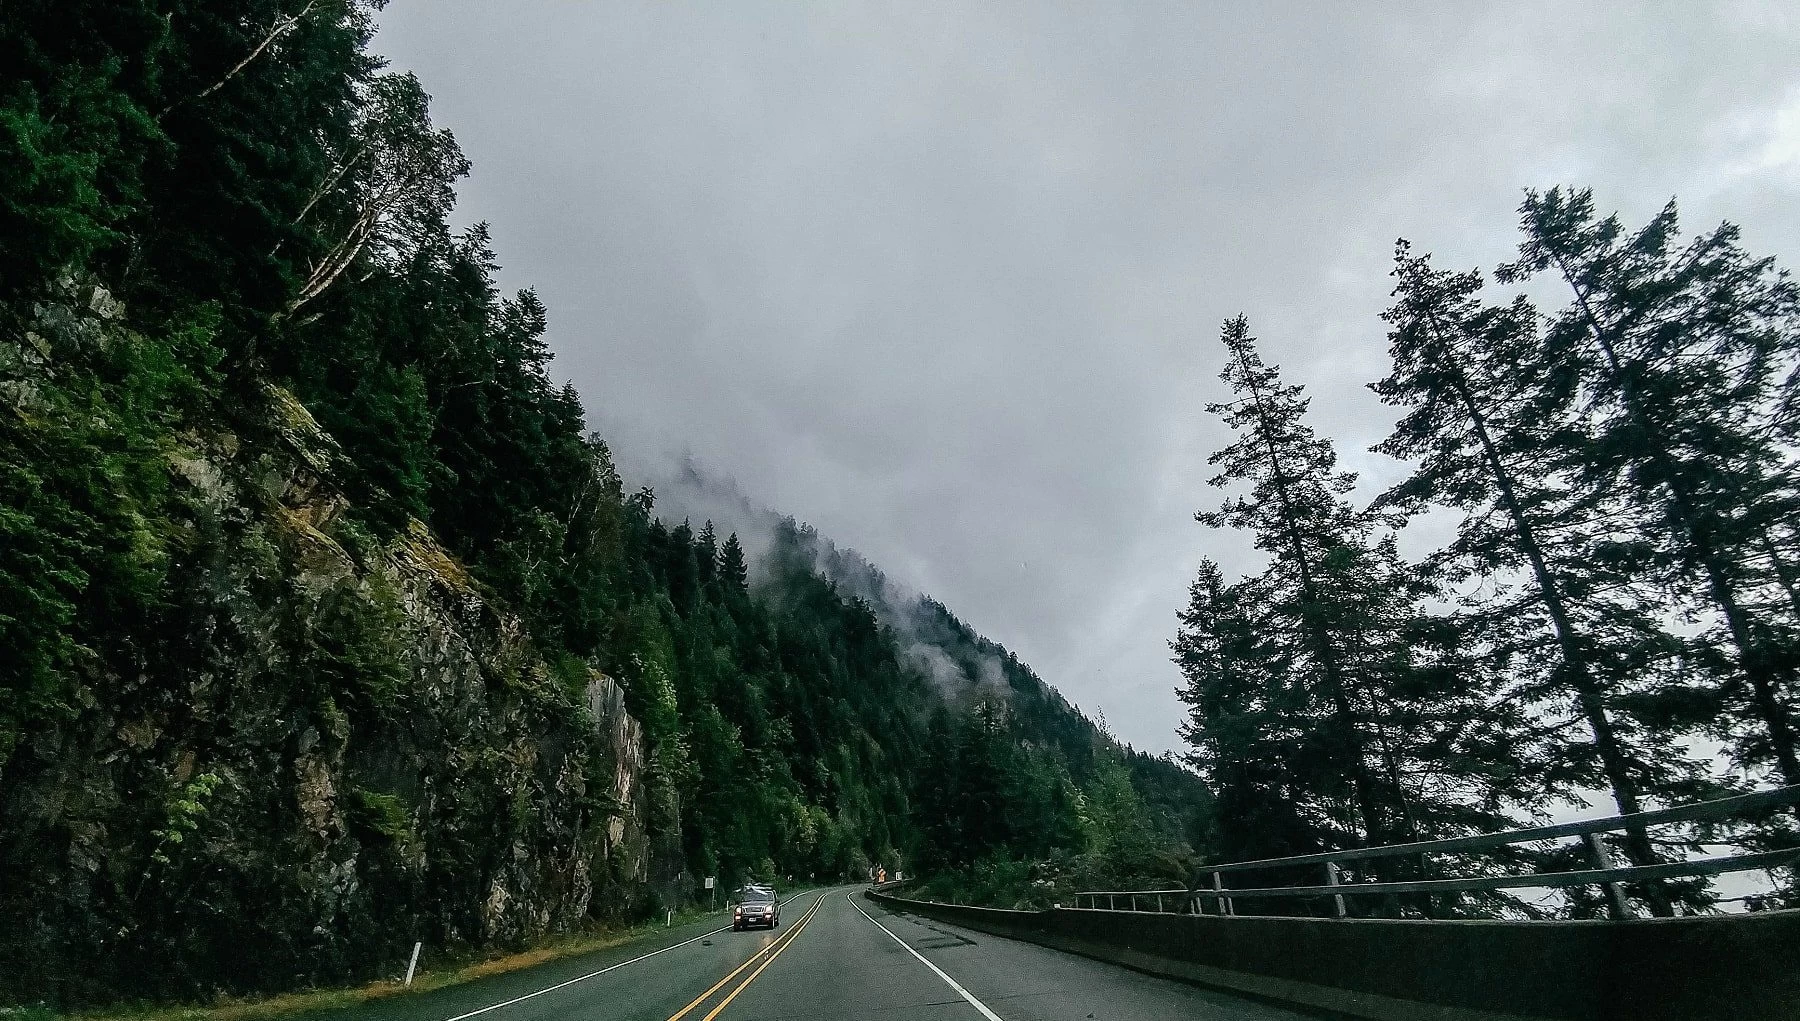 The Sea to Sky highway in Vancouver